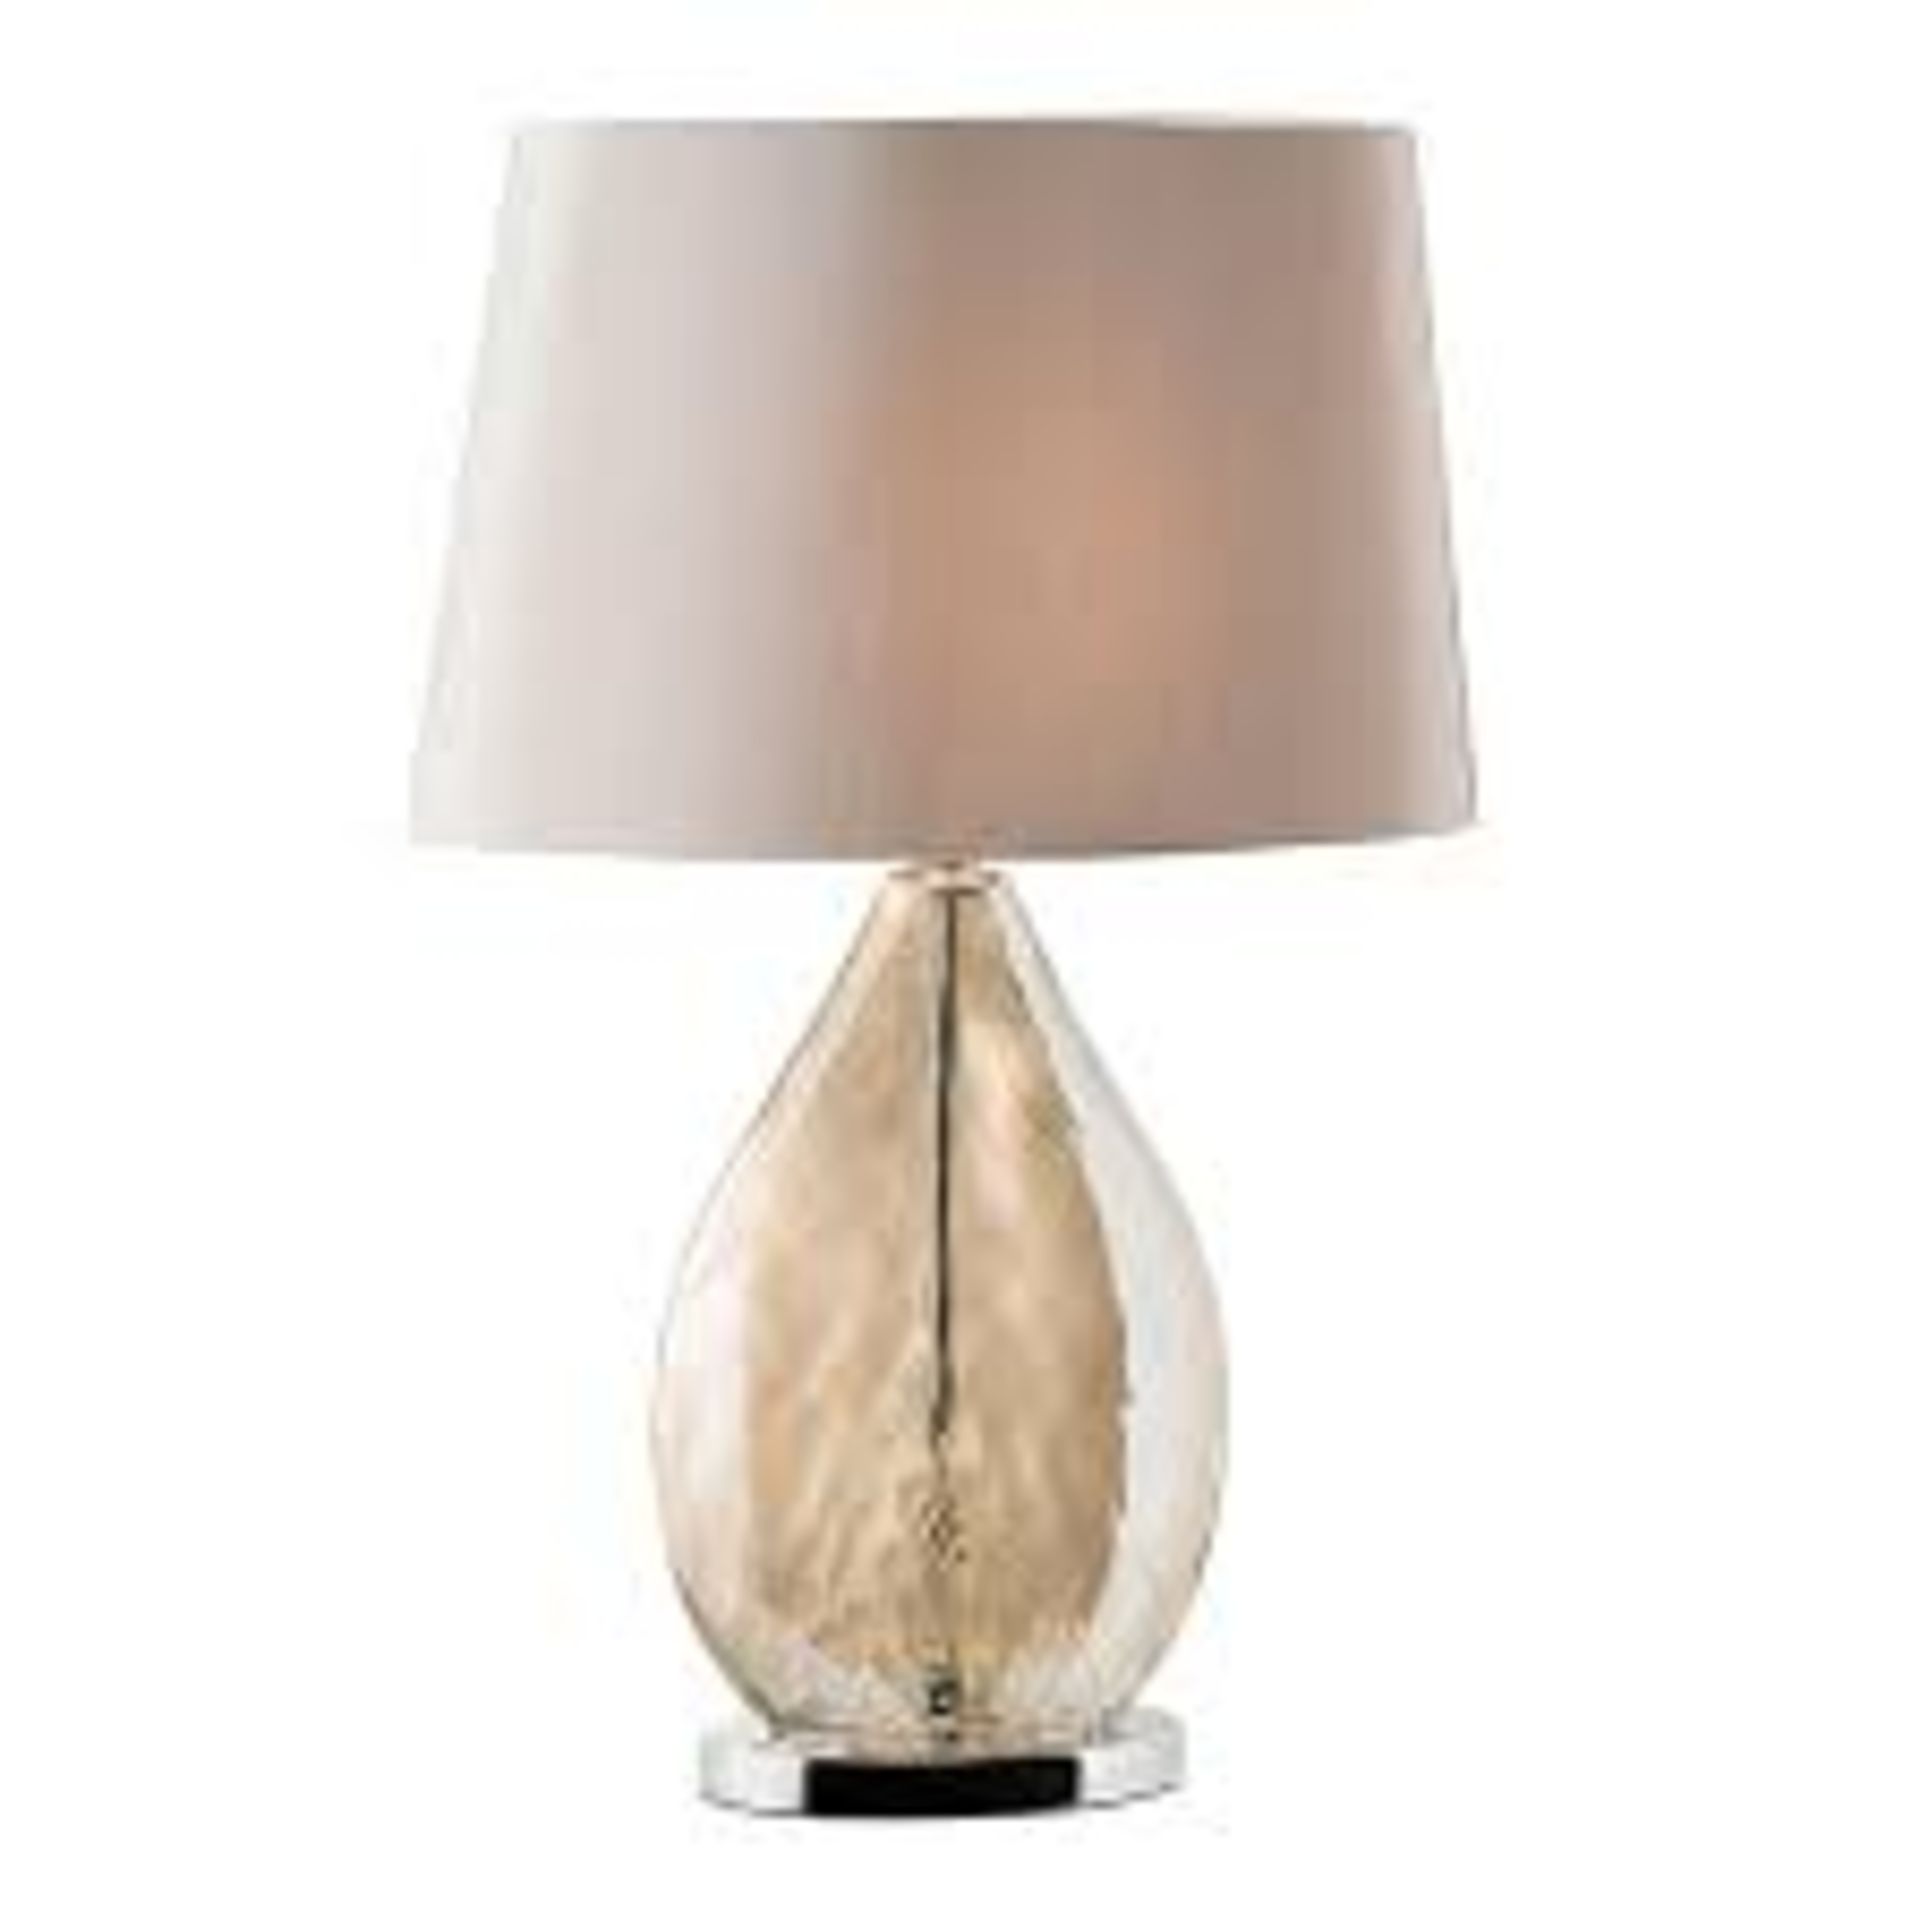 Boxed Enden Lighting 58.5 cm Bedside Table Lamp RRP £75 (15554) (Appraisals Available Upon Request)